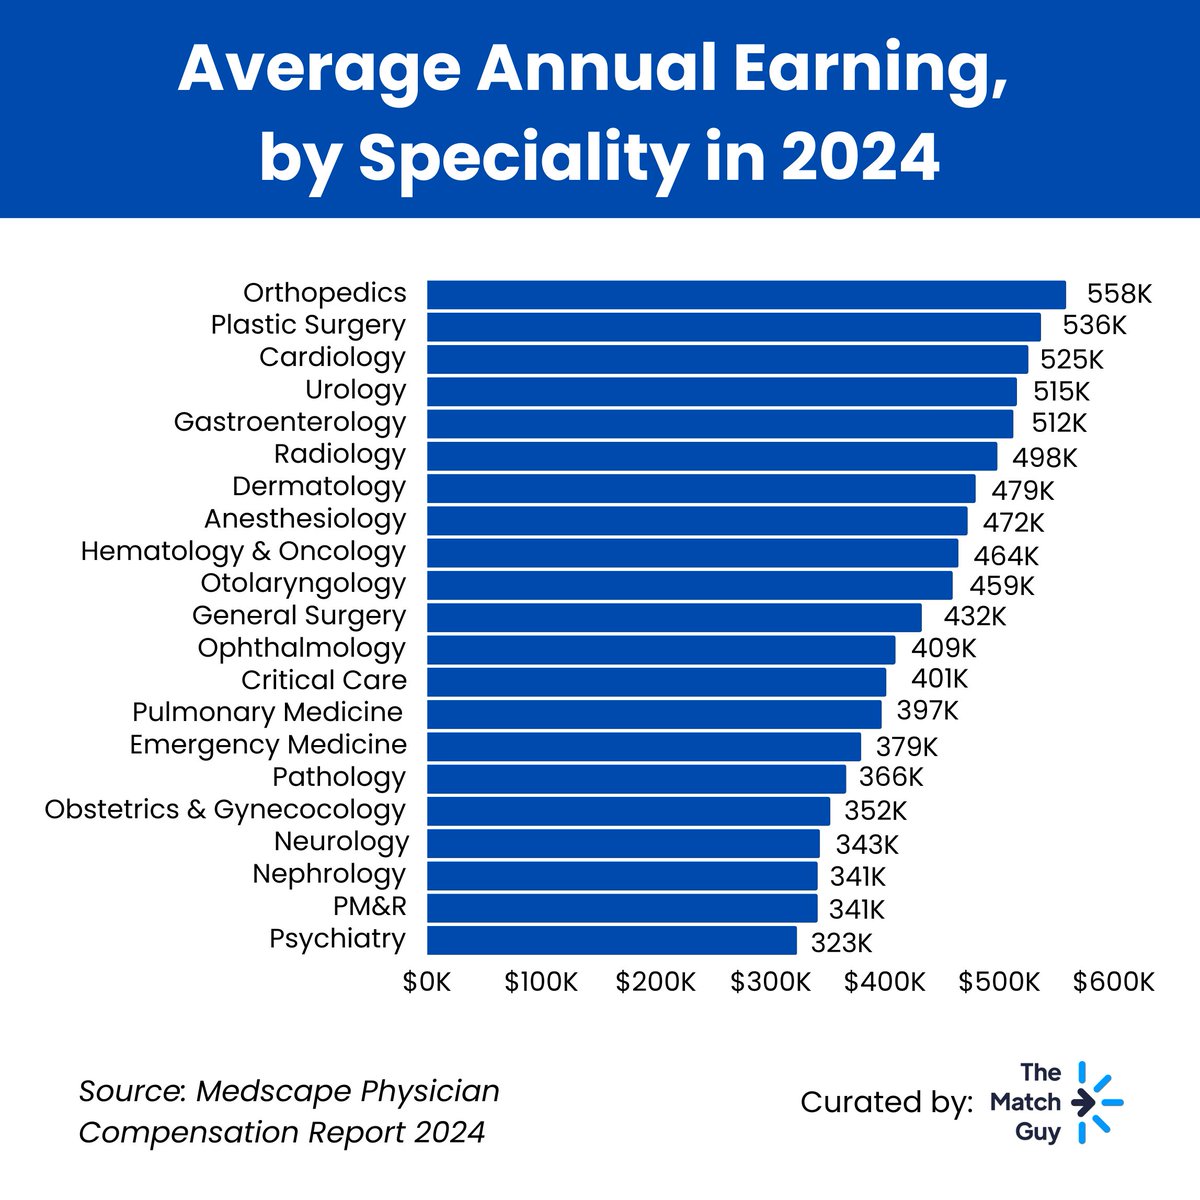 Average Annual Earning, by Specialty in 2024

Source: Medscape Physician Compensation Report 2024

#Medscape #Compensation #Earning #Specialty #Match2025 #ECFMG #IMG #NRMP #USMLE